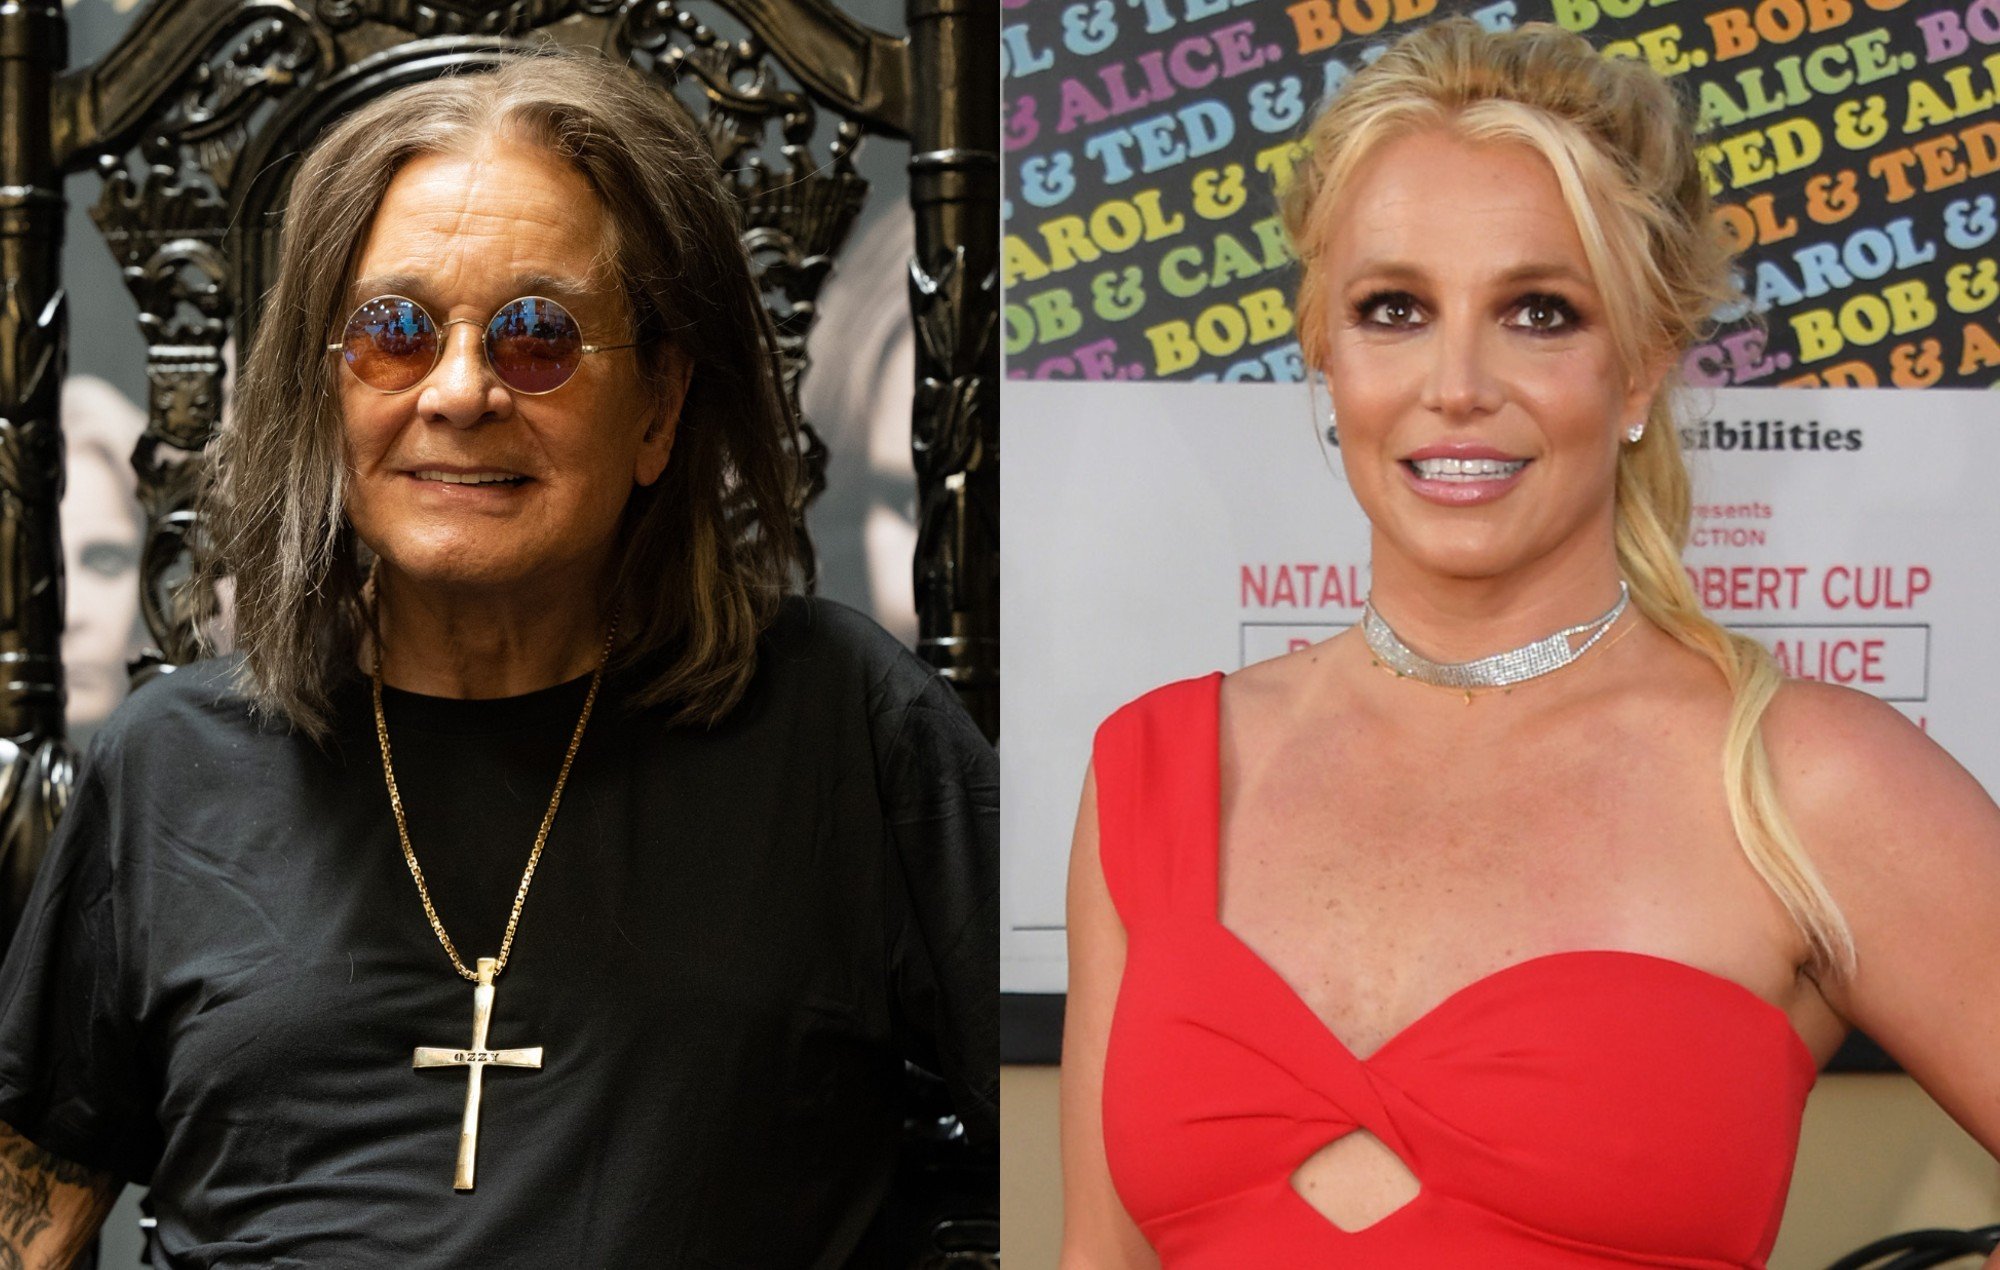 Ozzy Osbourne apologises to Britney Spears after comments about her dancing